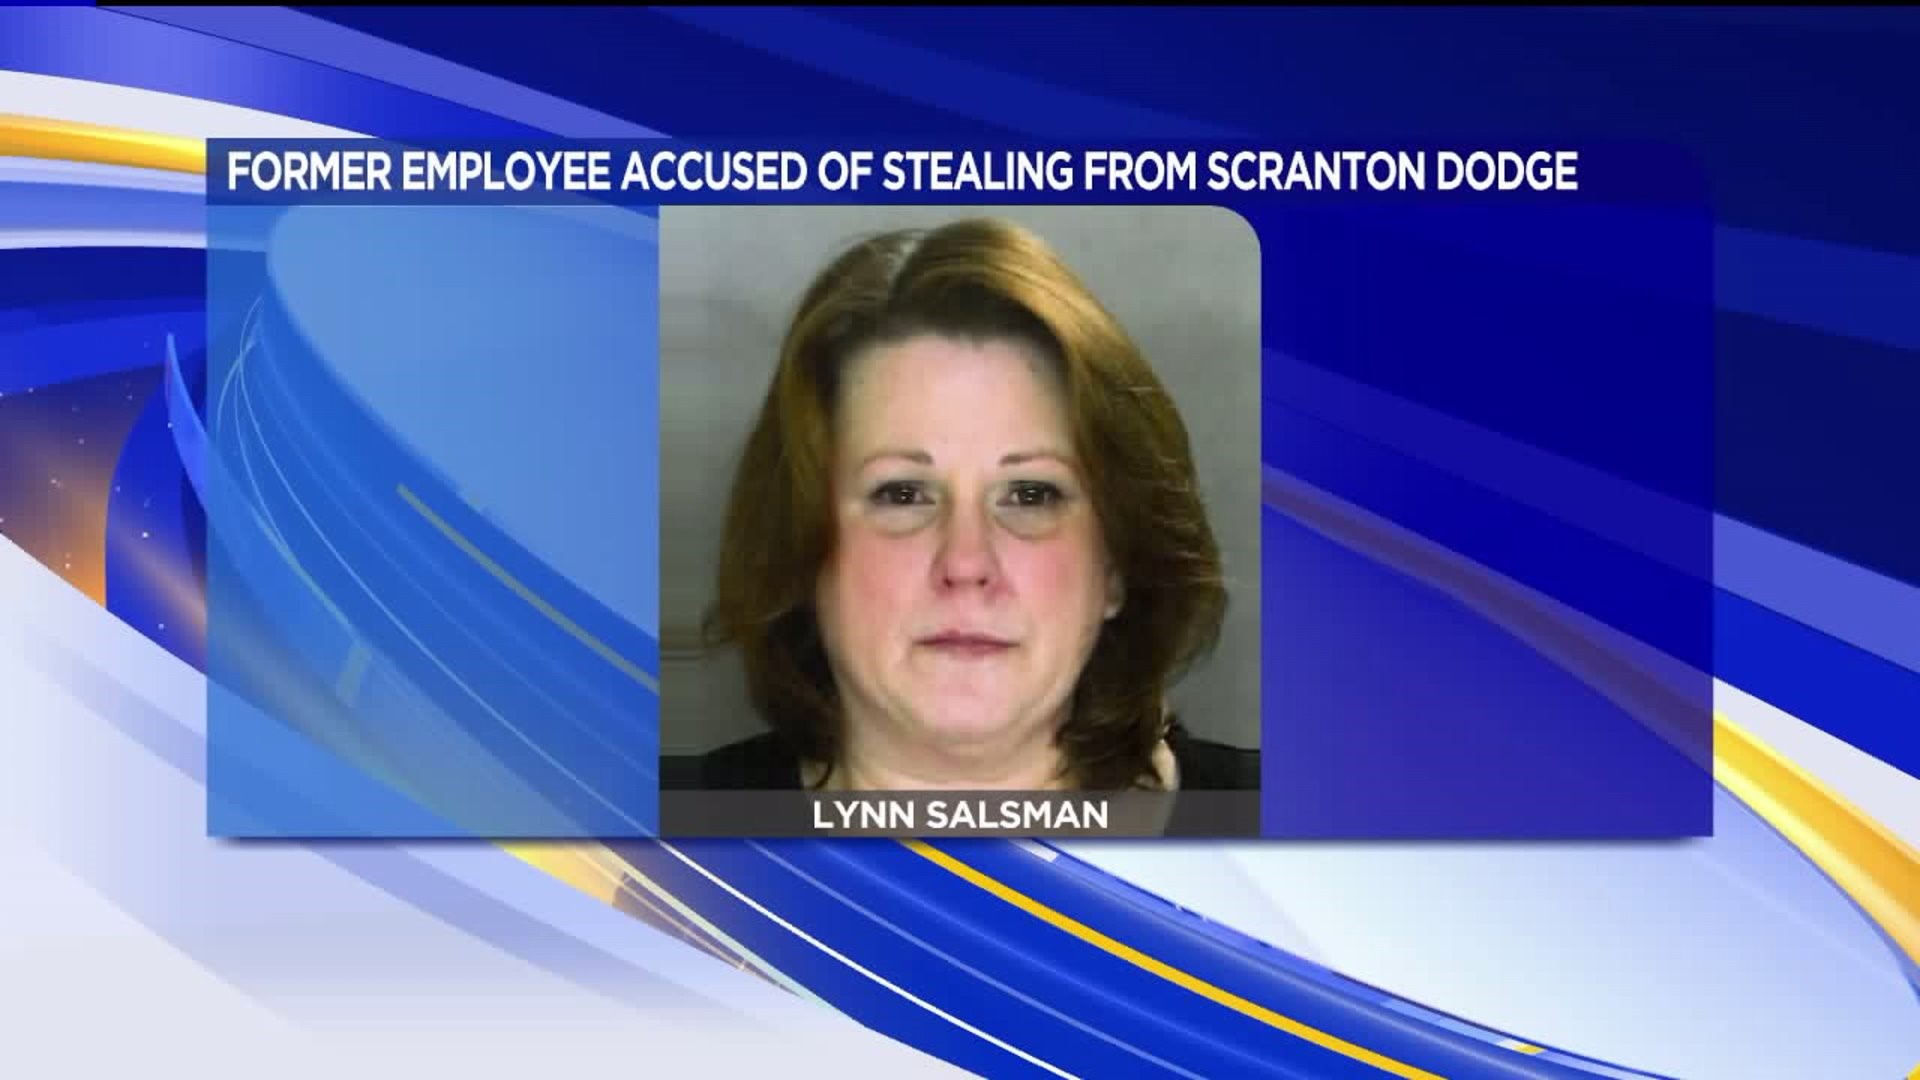 Police Say Woman Stole More Than $20,000 From Her Job